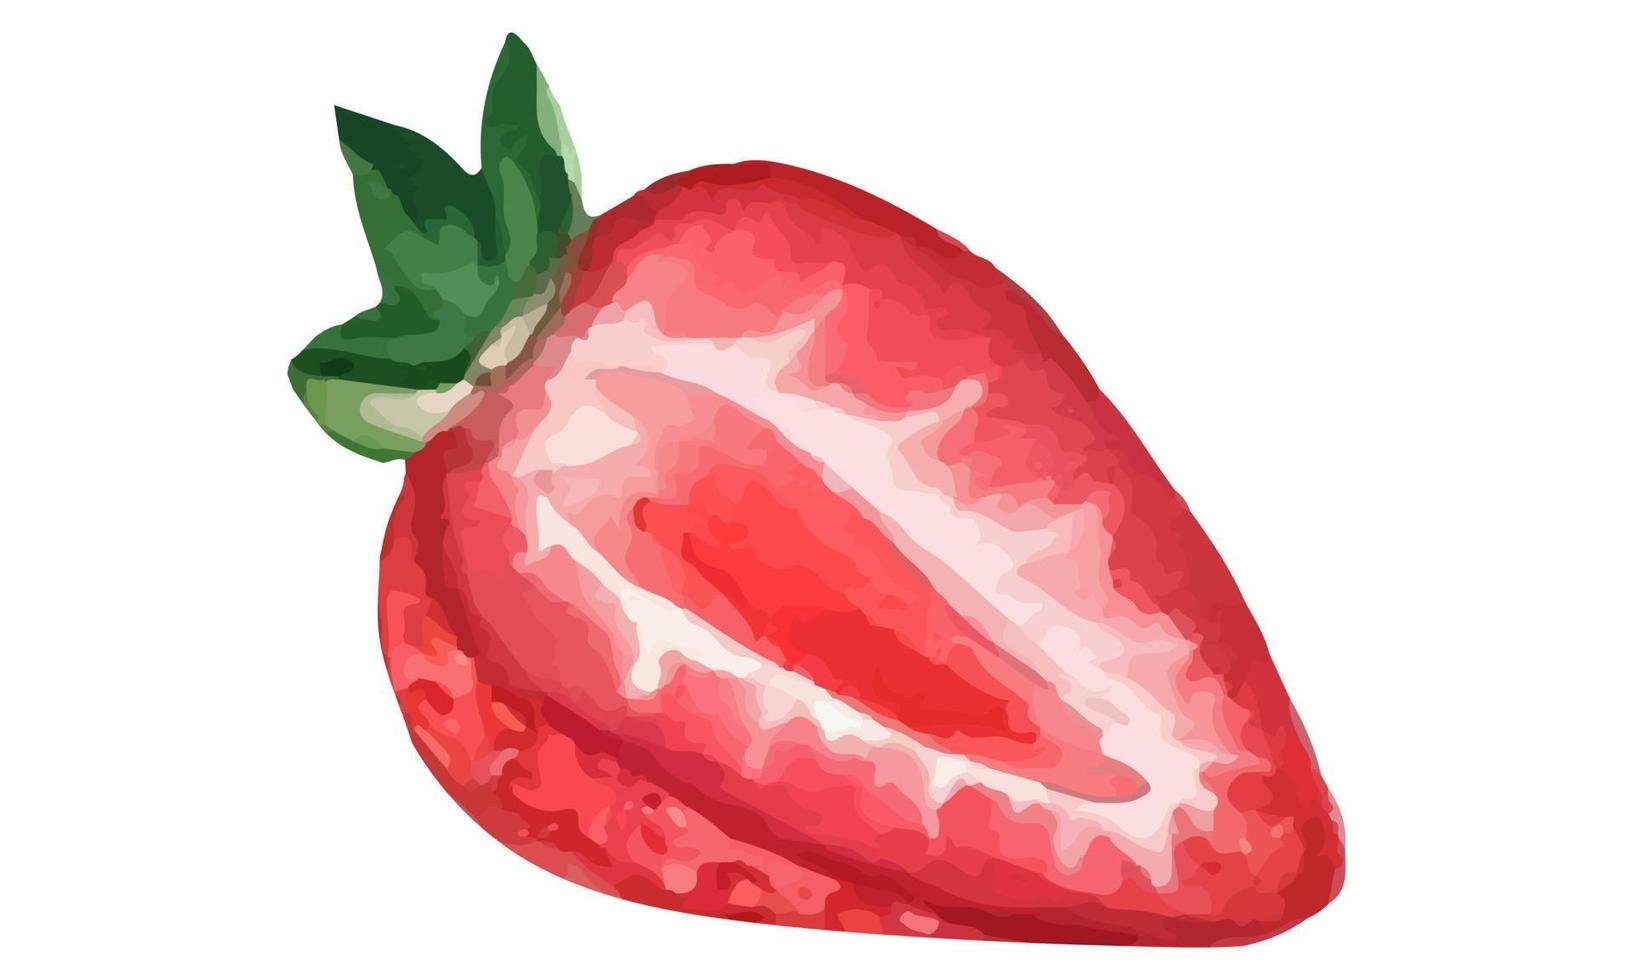 Hand drawn and painted watercolor ripe strawberry. Isolated on white background. Berries and fruit illustration. vector